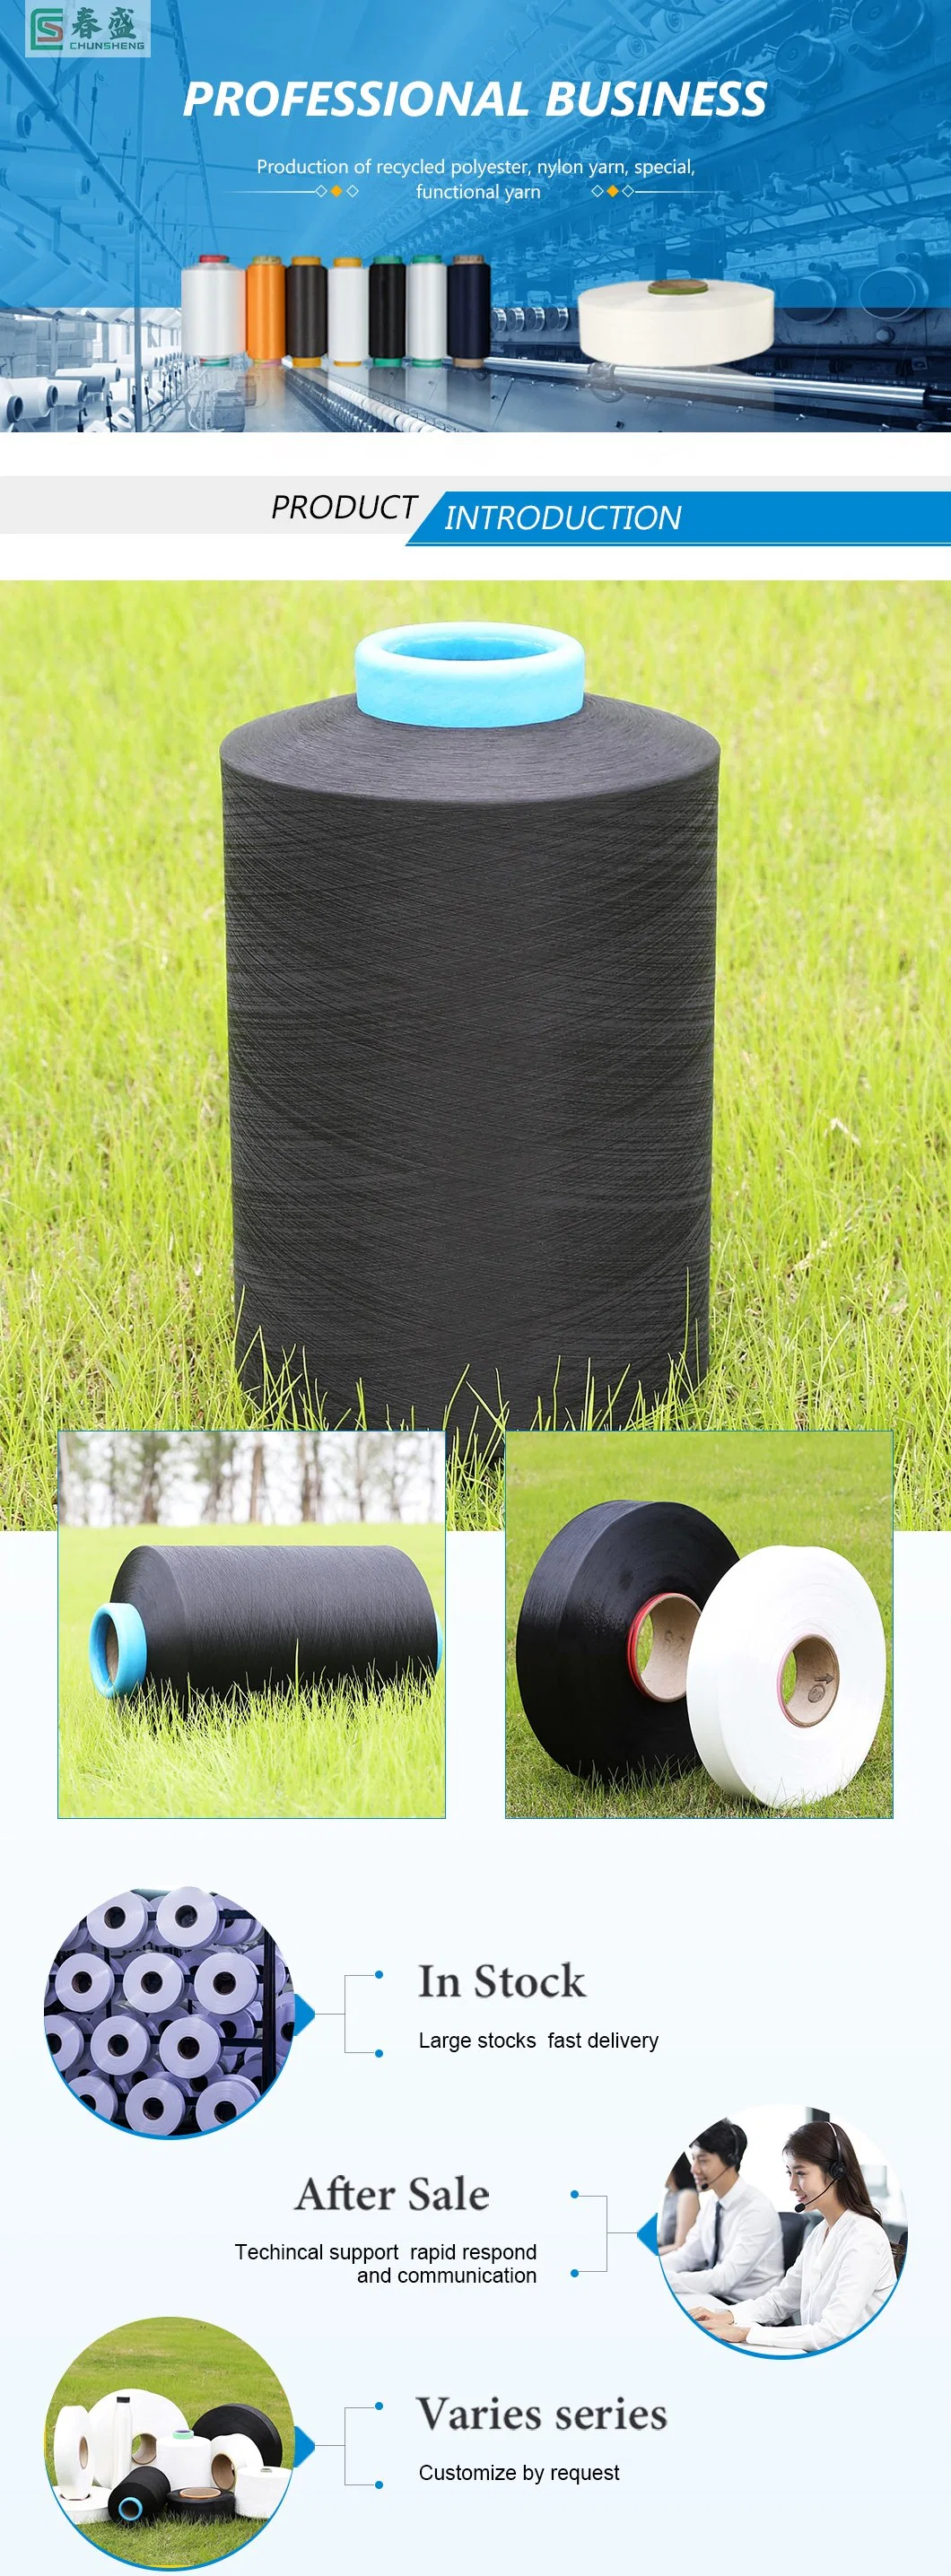 China Manufacturer Grs Recycled Polyester and Nylon Yarn for Knitting and Weaving